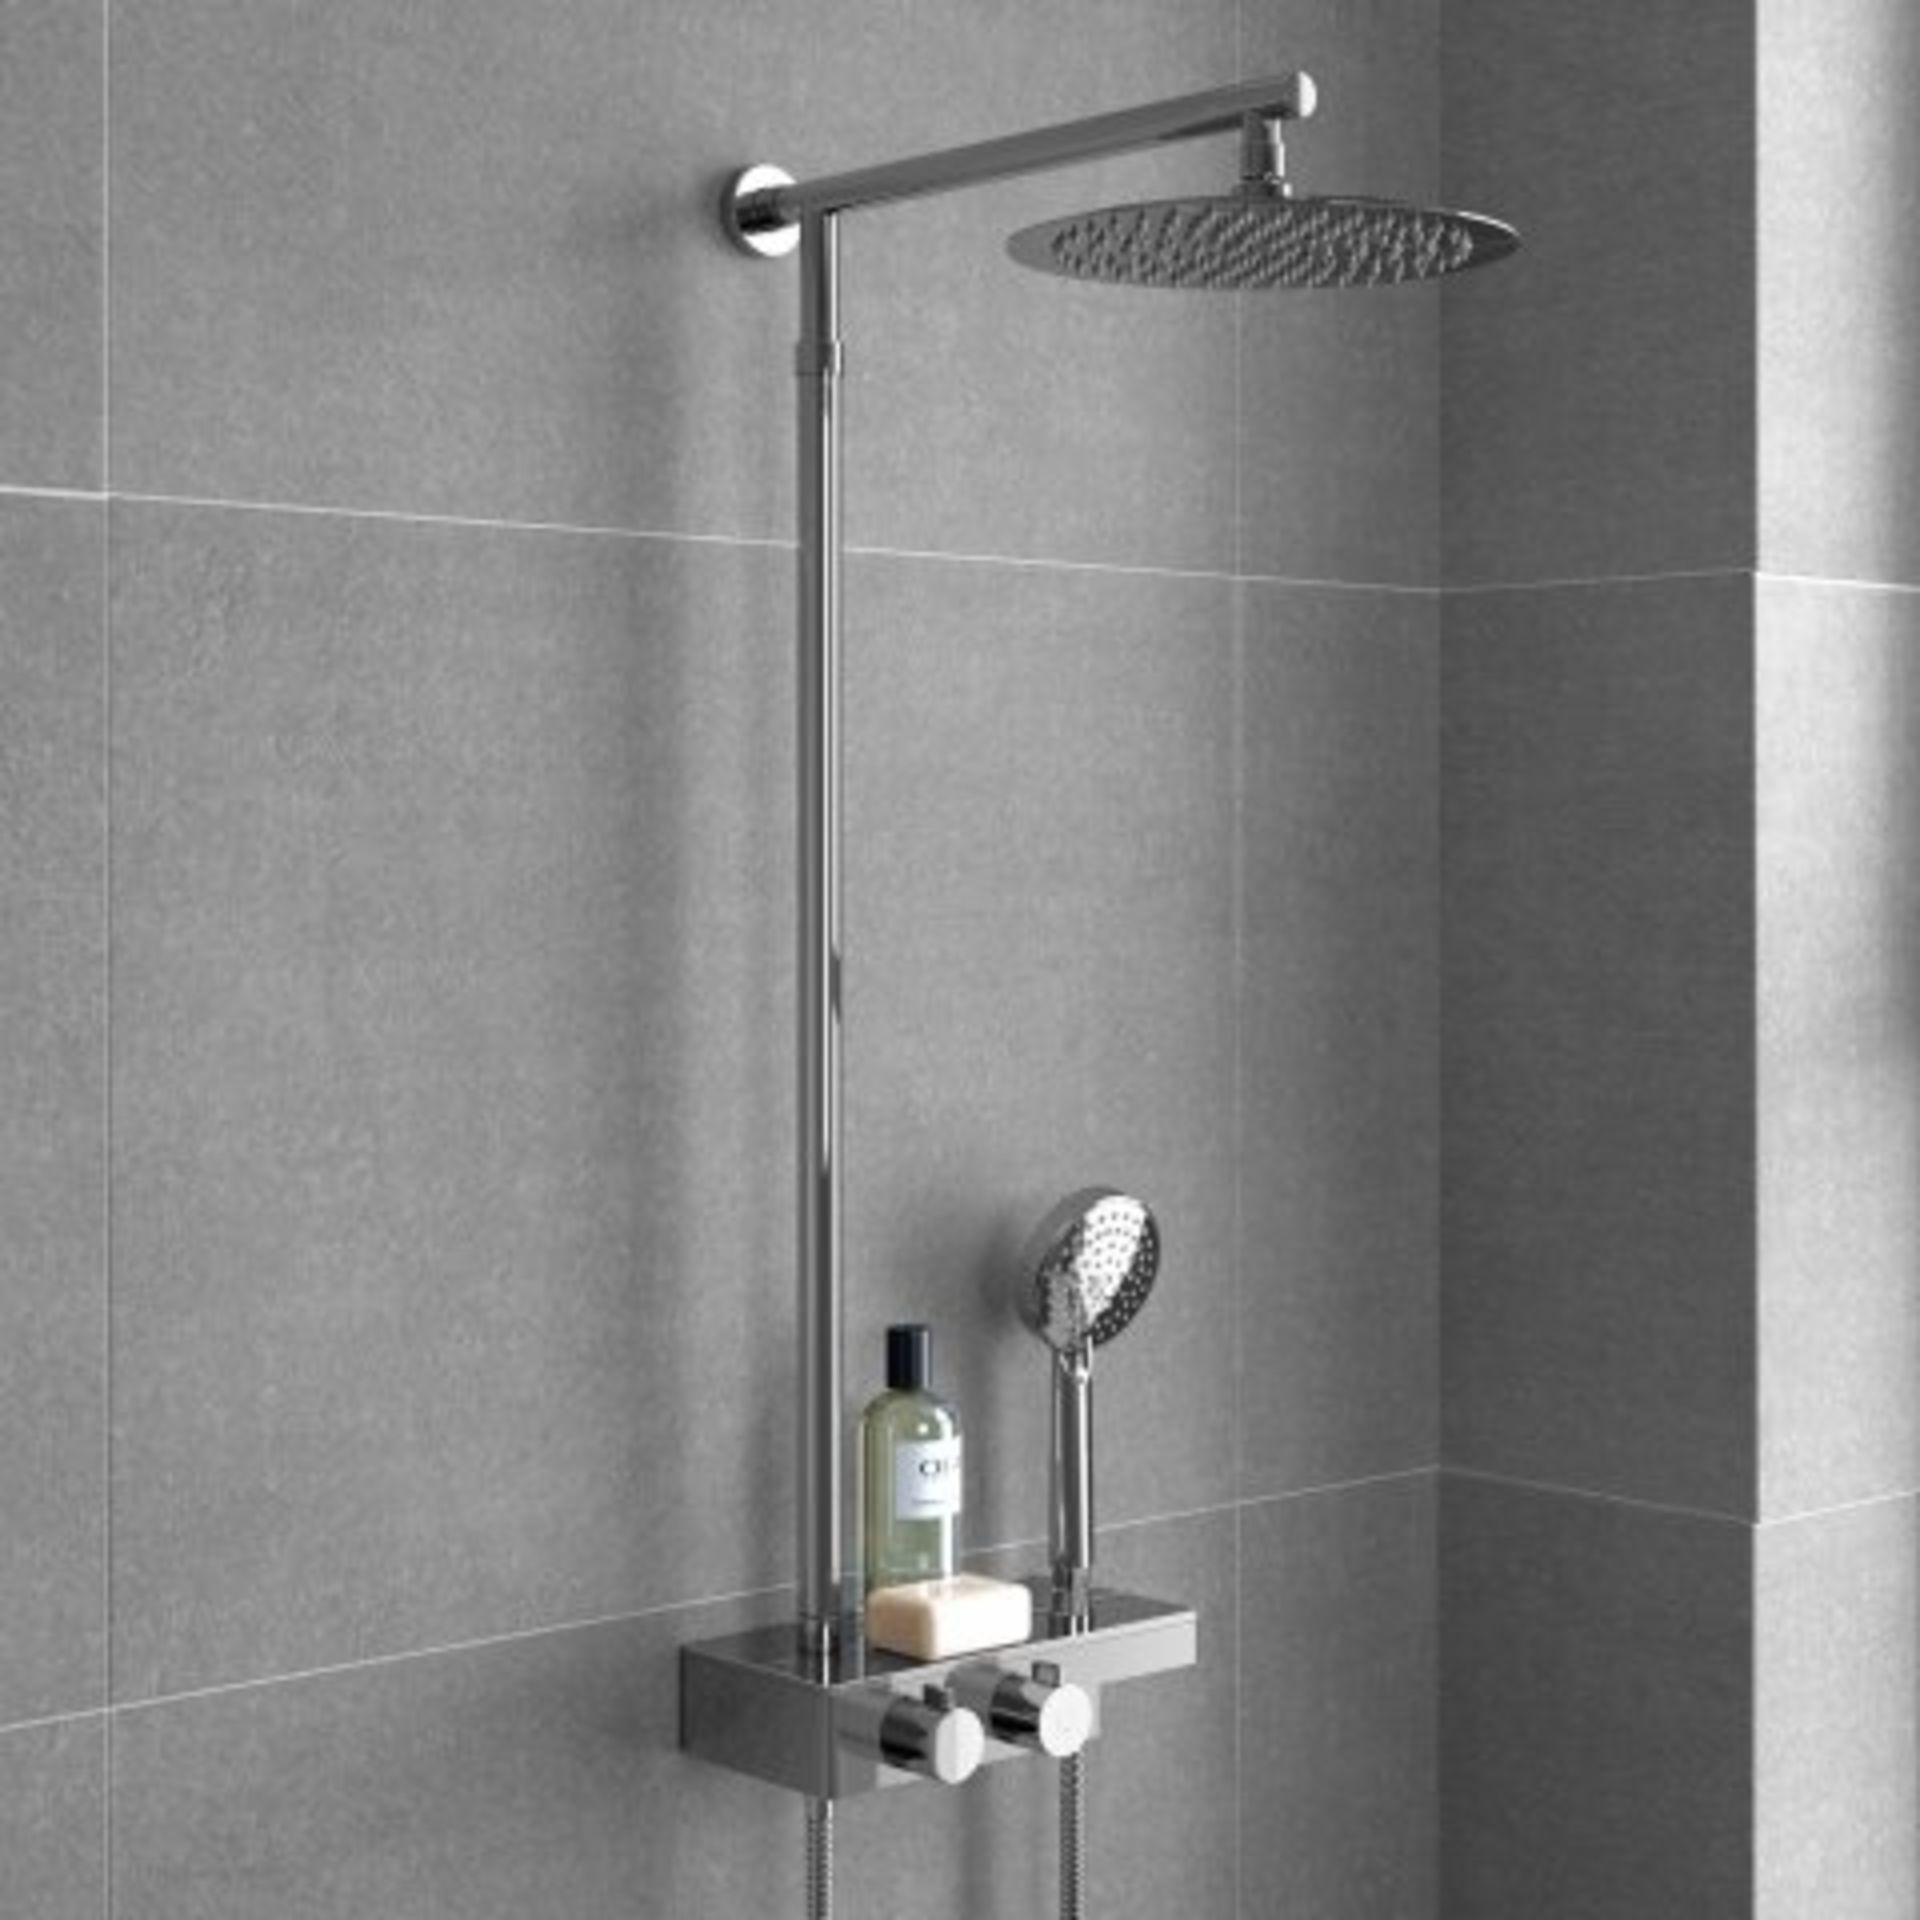 (V89) Round Exposed Thermostatic Mixer Shower Kit & Large Shower Head Designer Style Our - Image 3 of 7